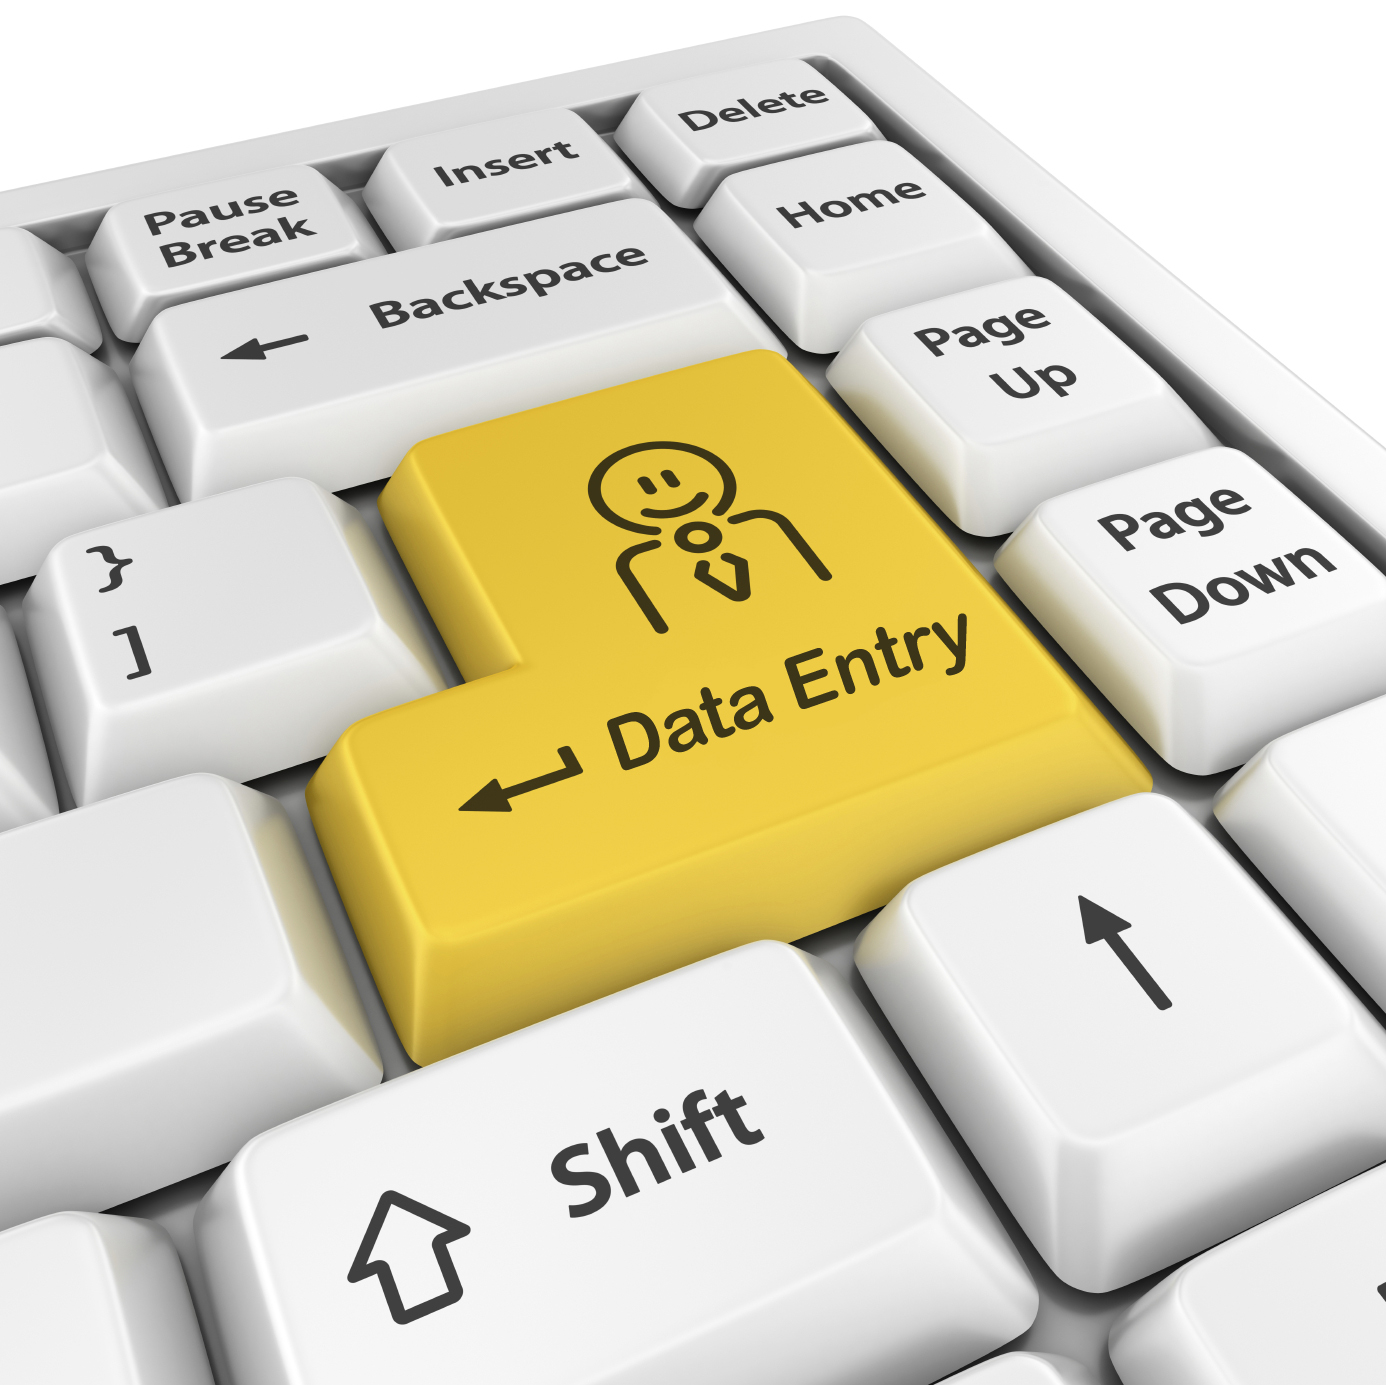 Do any kind of data entry excel, pdf, word document